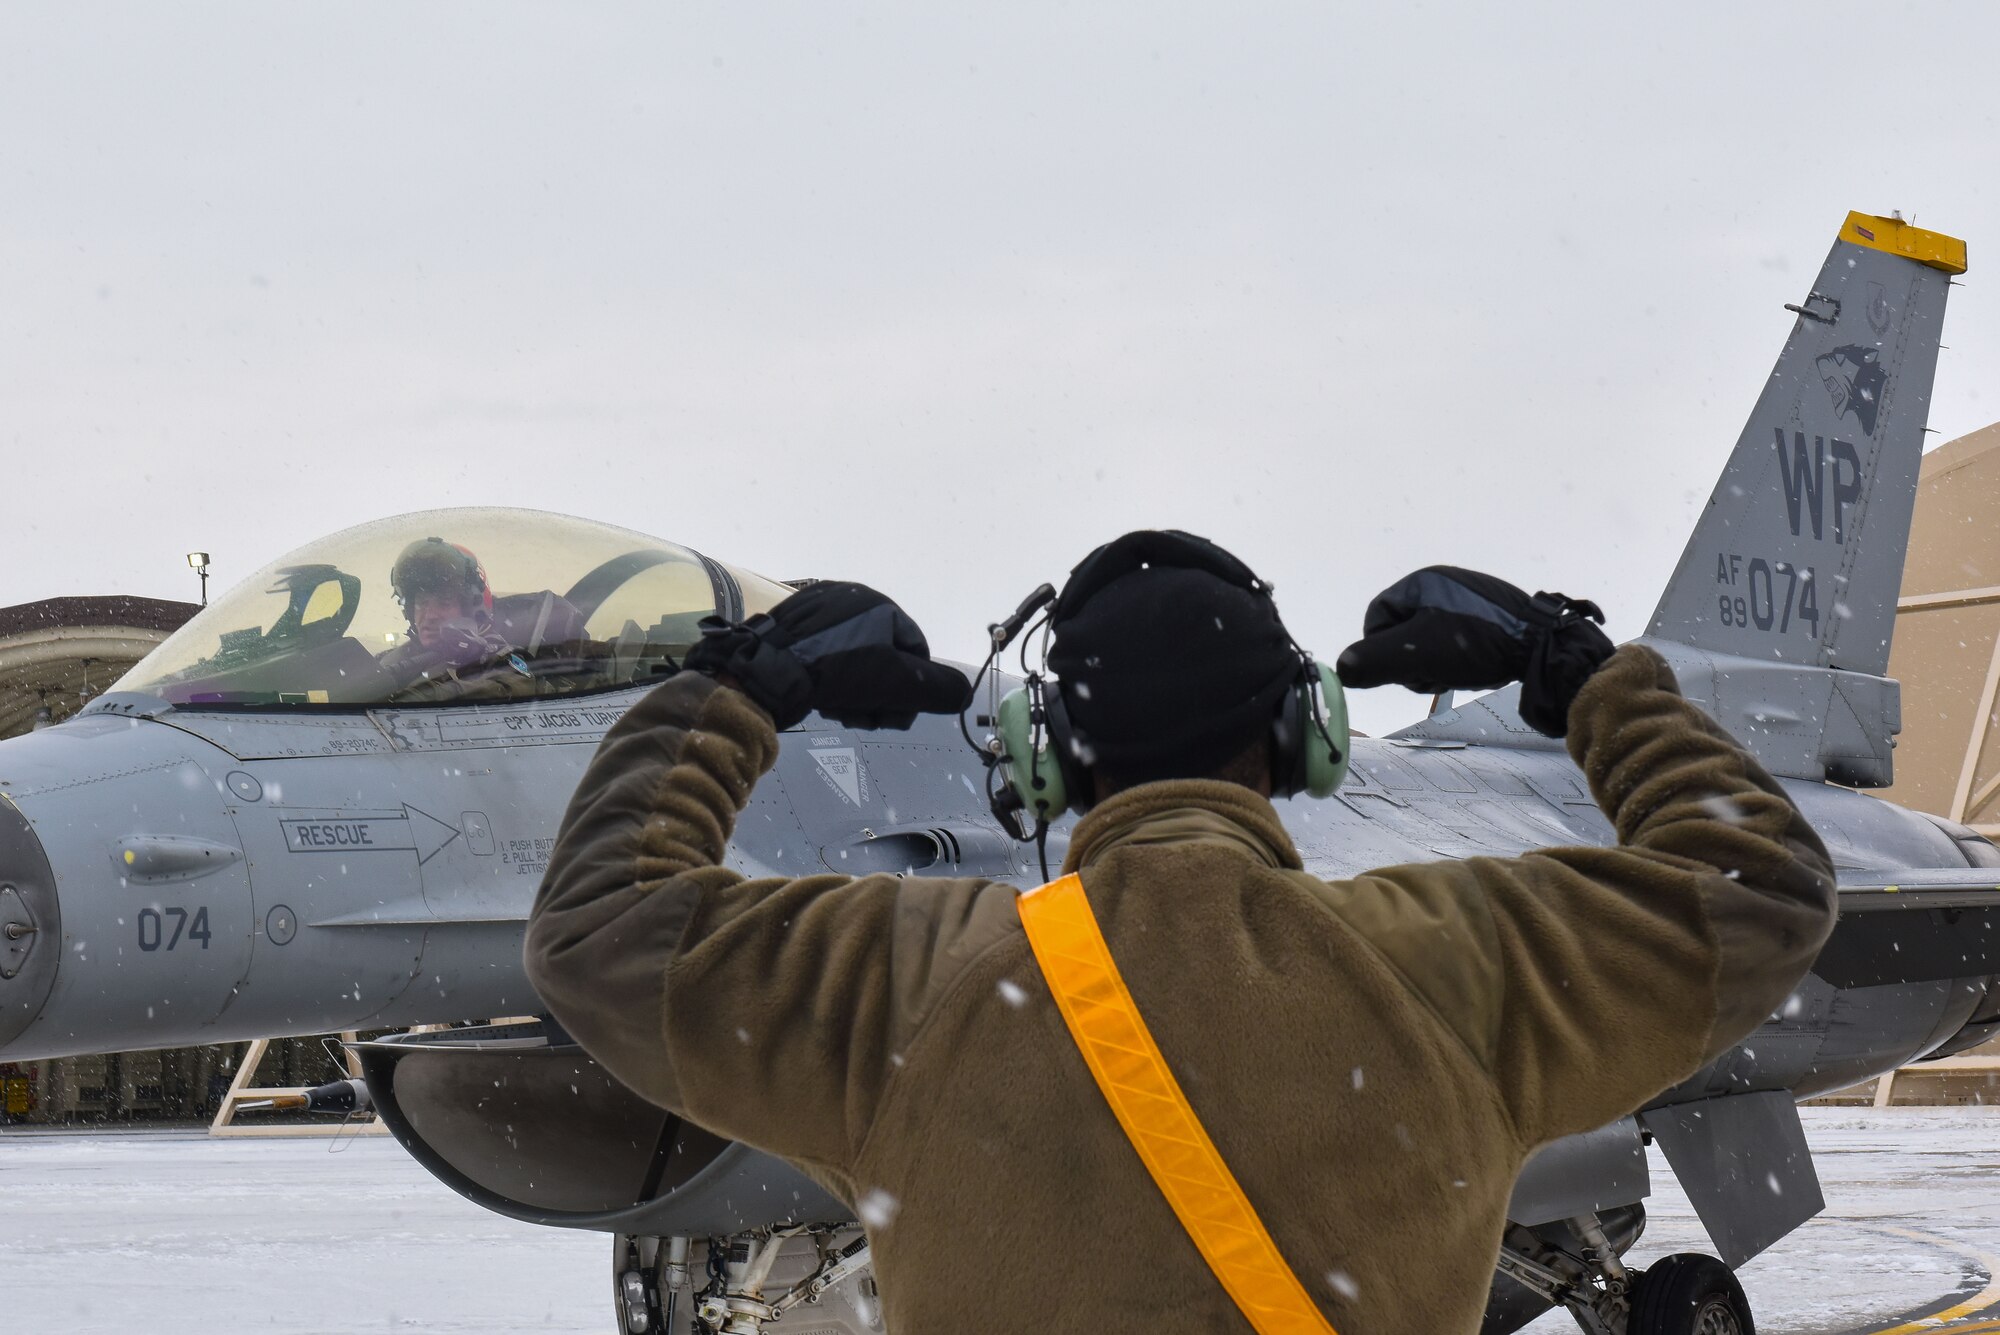 Airman 1st Class Zakkee Conwell, 80th Fighter Generation Squadron crew chief, poses with the ‘Crush ‘em’ hand gesture as U.S. Air Force Lt. Gen. Scott “Rolls” Pleus, 7th Air Force commander prepares to depart in an F-16 Fighting Falcon, at Kunsan Air Base, Republic of Korea, Jan. 26, 2023. The 80th Fighter Generation Squadron ‘Juvats’ are also known as the Headhunters. (U.S. Air Force photo by Tech. Sgt. Timothy Dischinat)